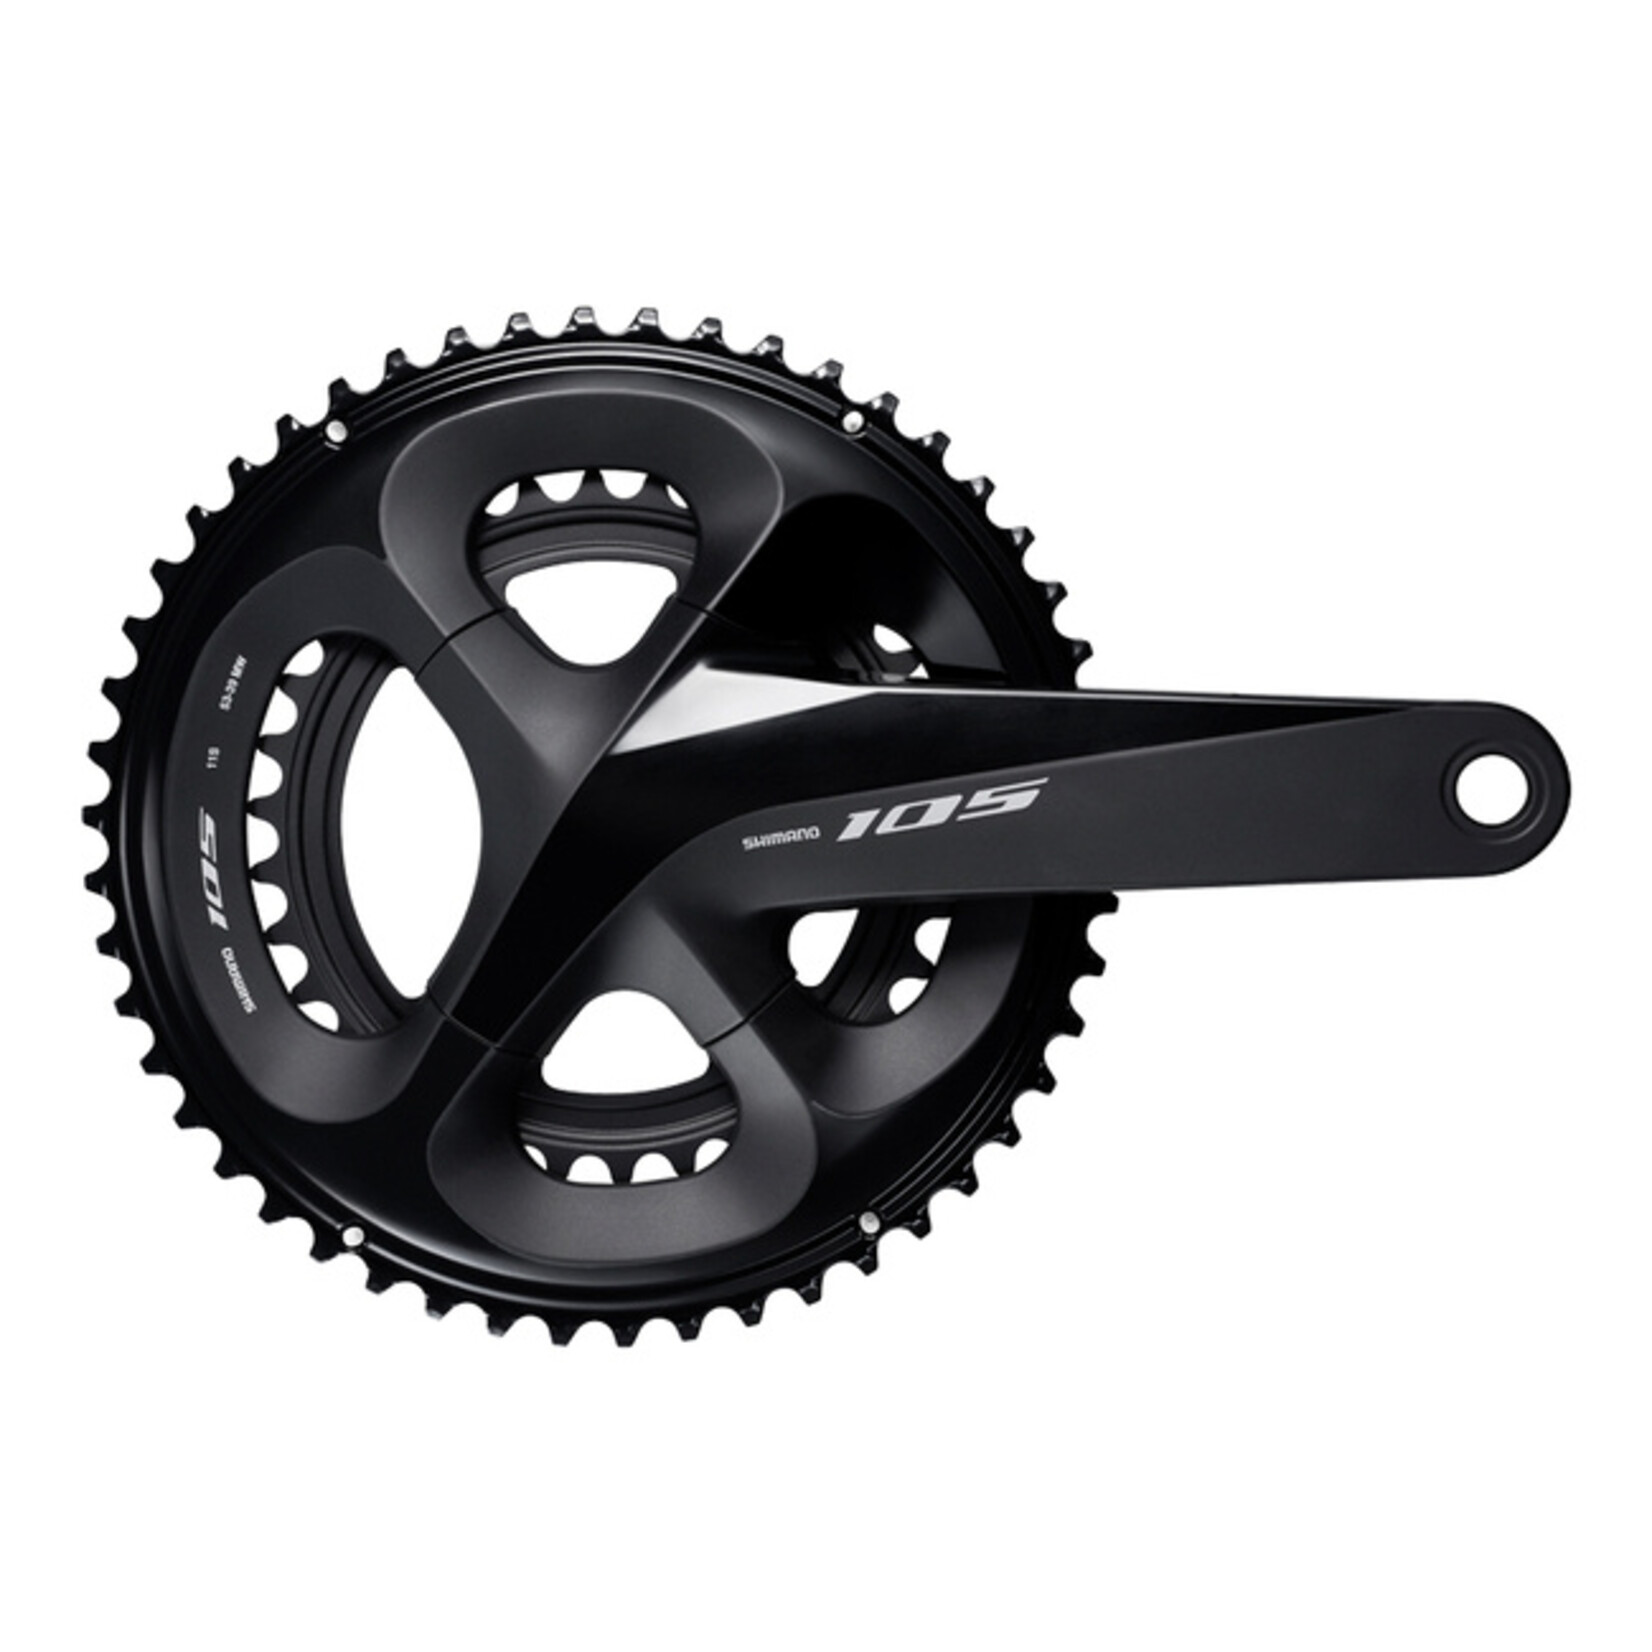 SHIMANO Shimano, 105 FC-R7000, Crankset, Speed: 11, Spindle: 24mm, BCD: 110, 34/50, Hollowtech II, 172.5mm, Black, Road Disc